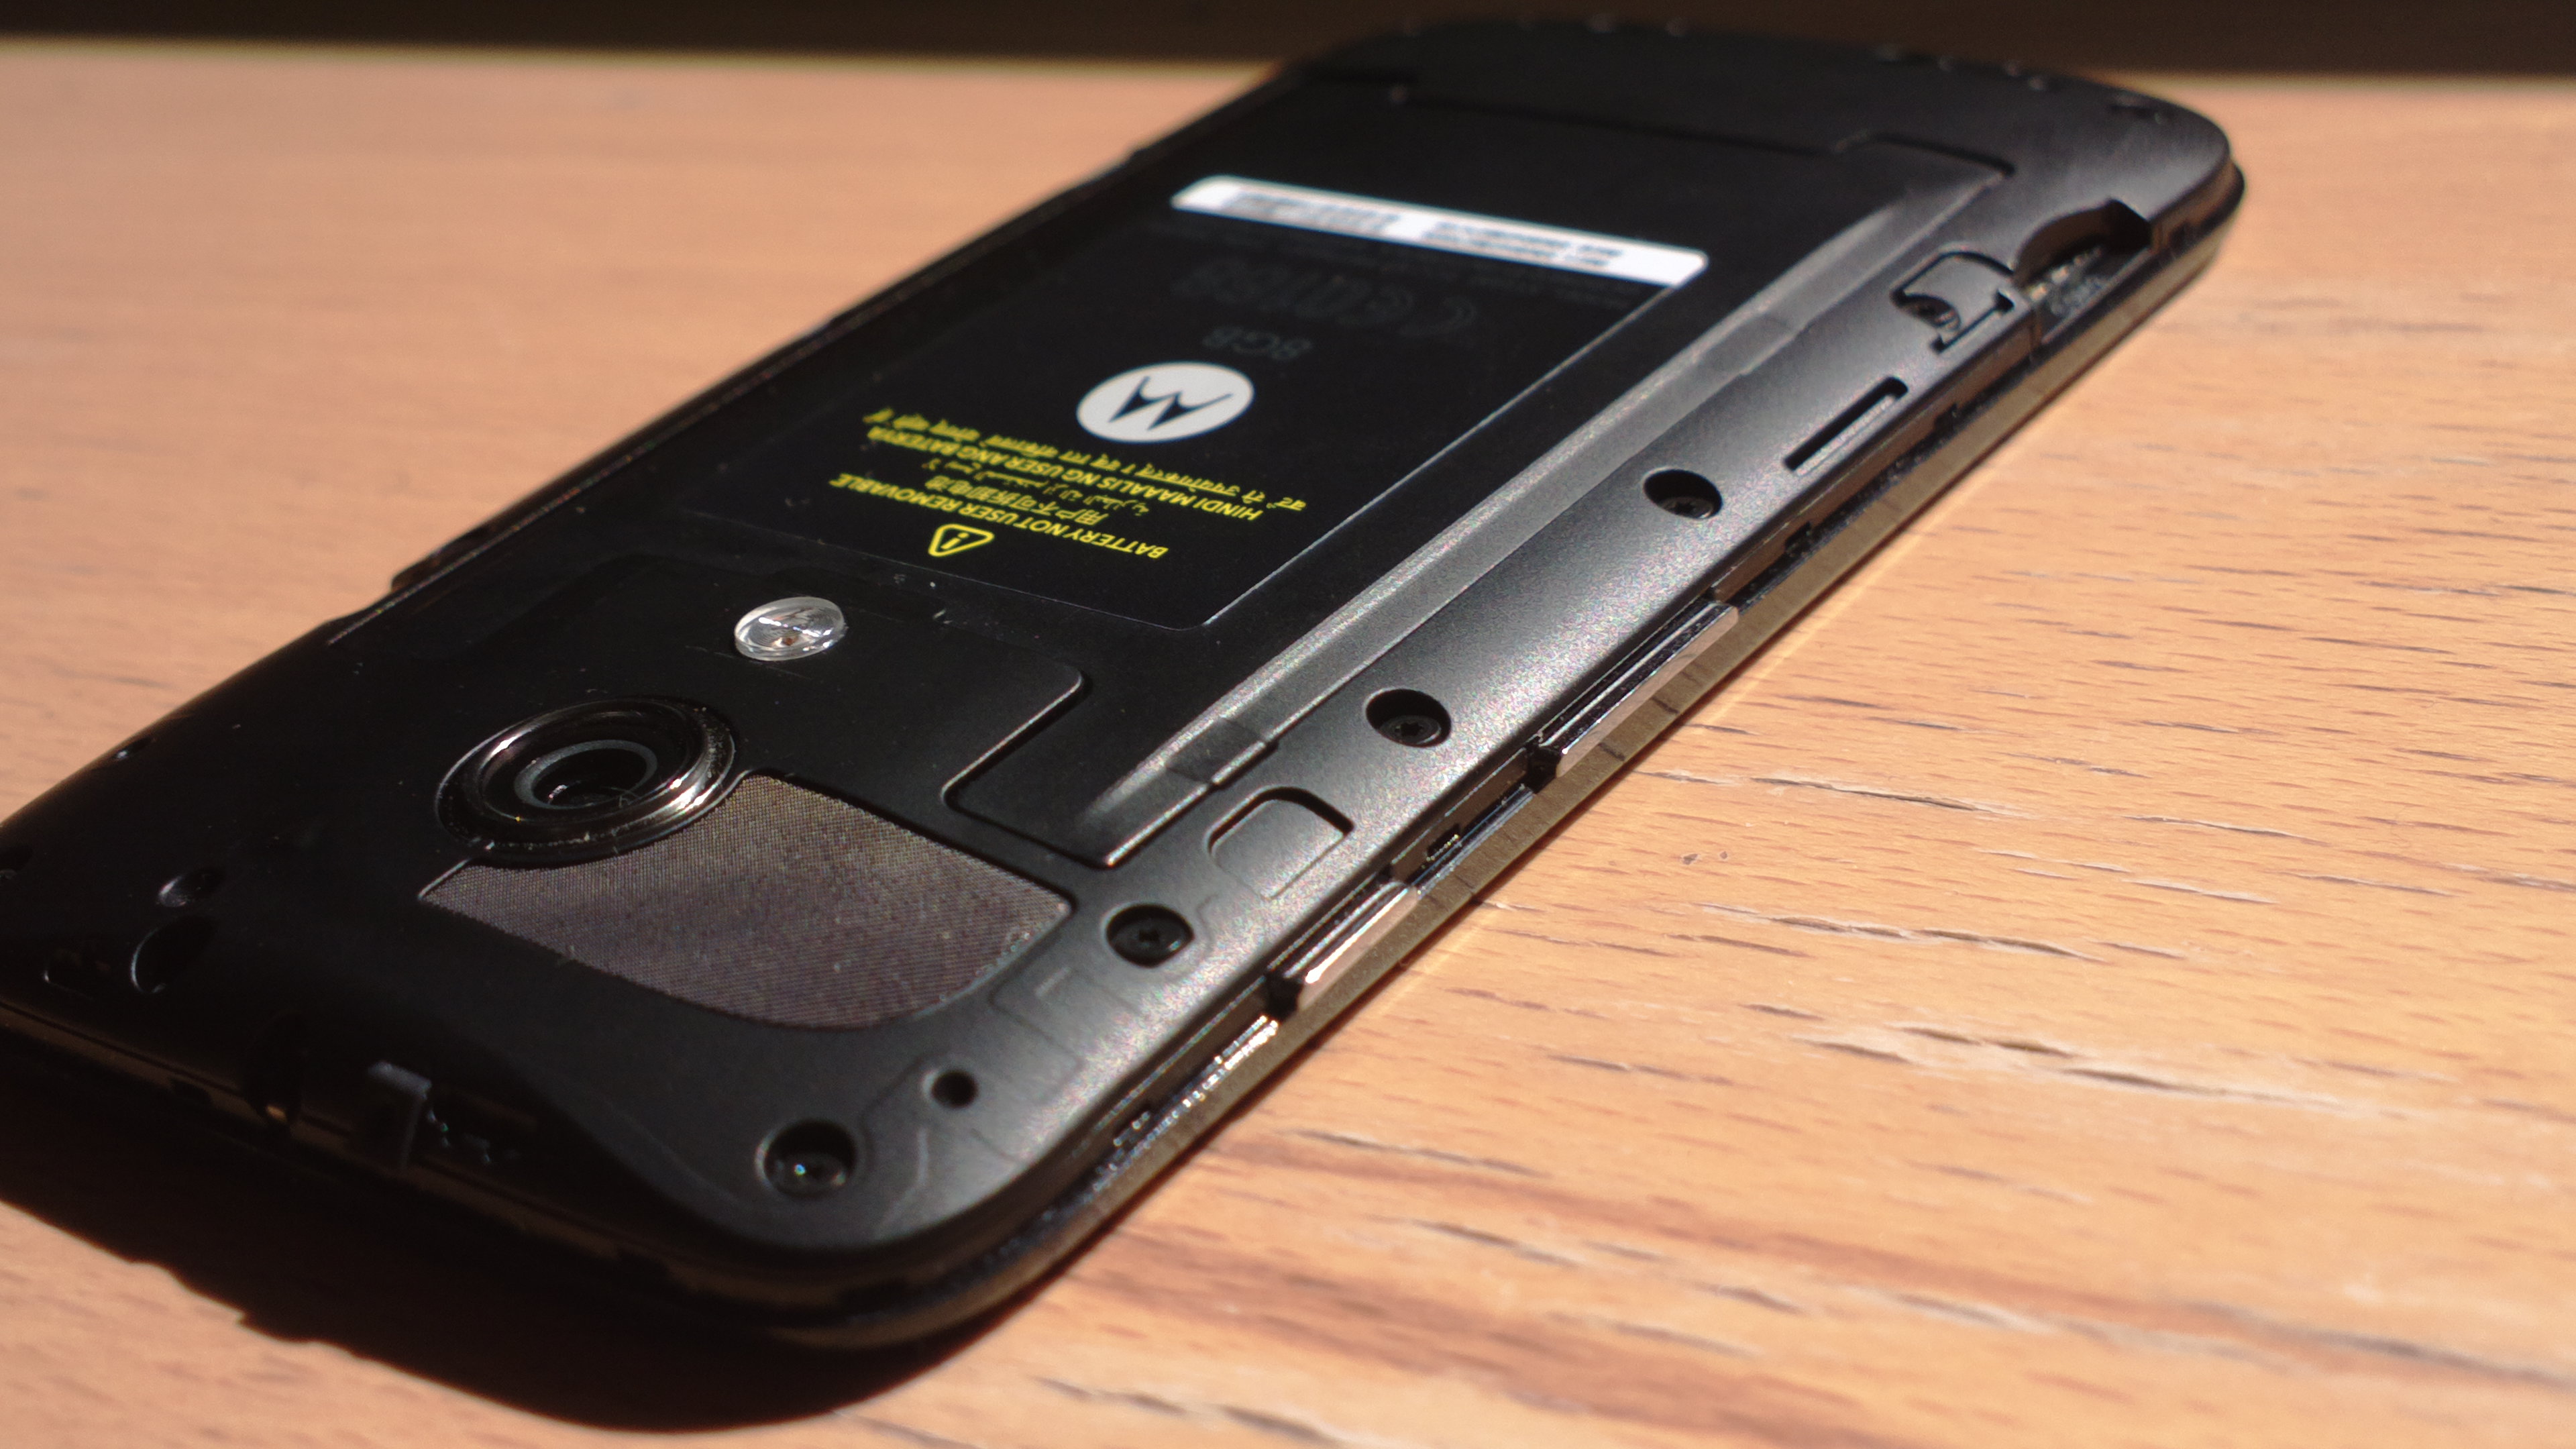 moto g review back cover battery top left ycp